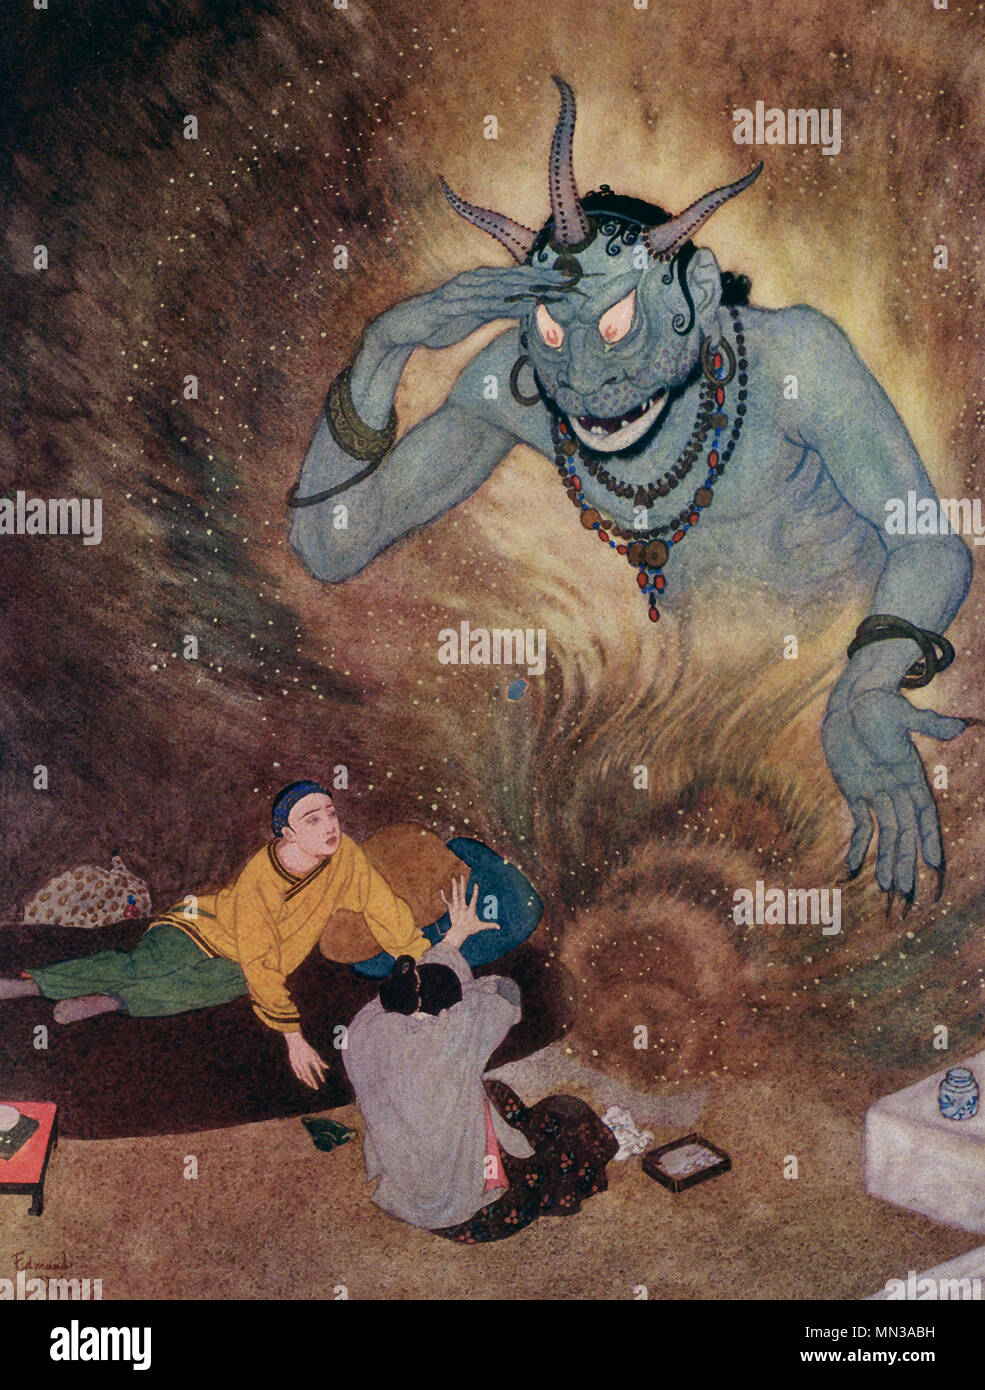 https://c8.alamy.com/comp/MN3ABH/this-early-1900s-illustration-shows-aladdin-and-the-efrite-the-tale-is-a-folktale-and-probably-originated-in-the-middle-east-his-tale-is-often-connected-with-andor-included-in-the-thousand-and-one-nights-or-the-arabian-nights-it-is-not-one-of-the-original-tales-but-one-included-by-the-frenchman-antoine-galland-aladdin-is-a-poor-man-in-china-who-is-recruited-by-a-sorcerer-named-mustapha-mustapha-wants-aladdin-to-retrieve-a-magic-oil-lamp-from-a-cave-as-seen-herealaddin-does-and-within-is-an-effrite-also-known-as-a-genie-who-tells-him-that-his-wish-is-his-command-MN3ABH.jpg